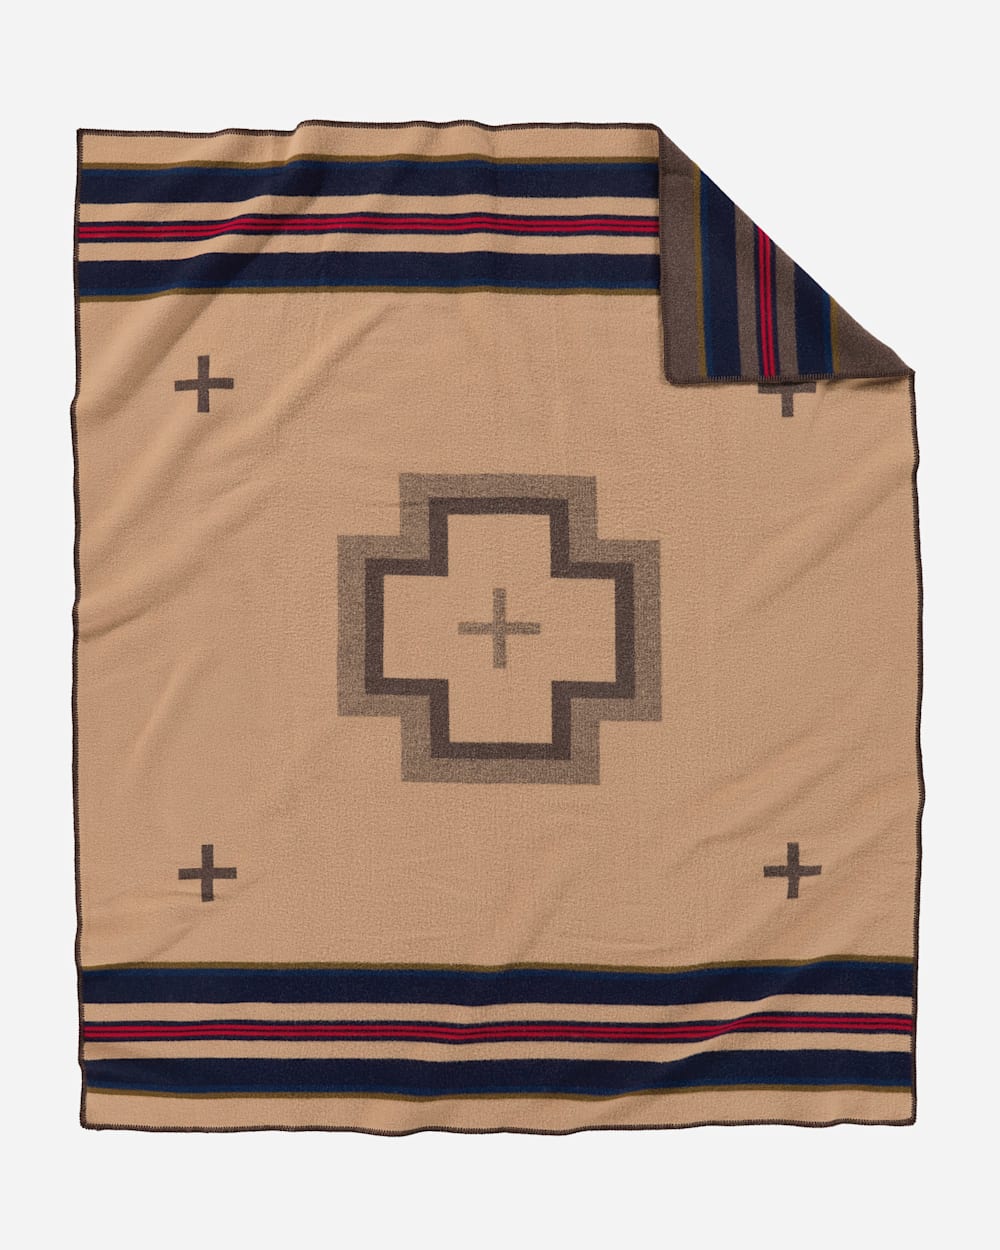 ADDITIONAL VIEW OF SHELTER BAY BLANKET IN BROWN image number 2